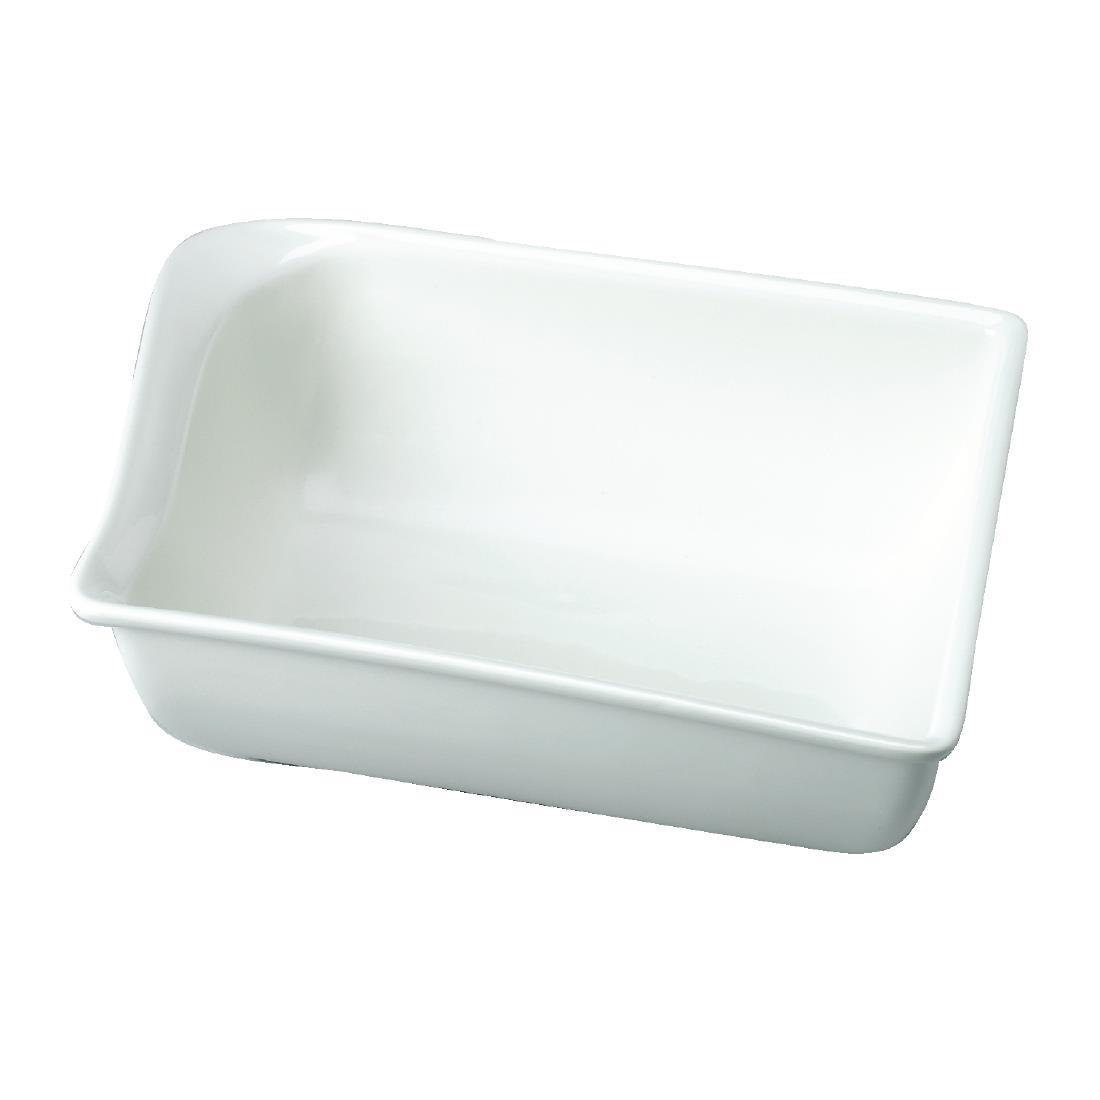 Churchill Alchemy Counterwave Serving Dishes 230x 310mm (Pack of 2) - CC416  - 1